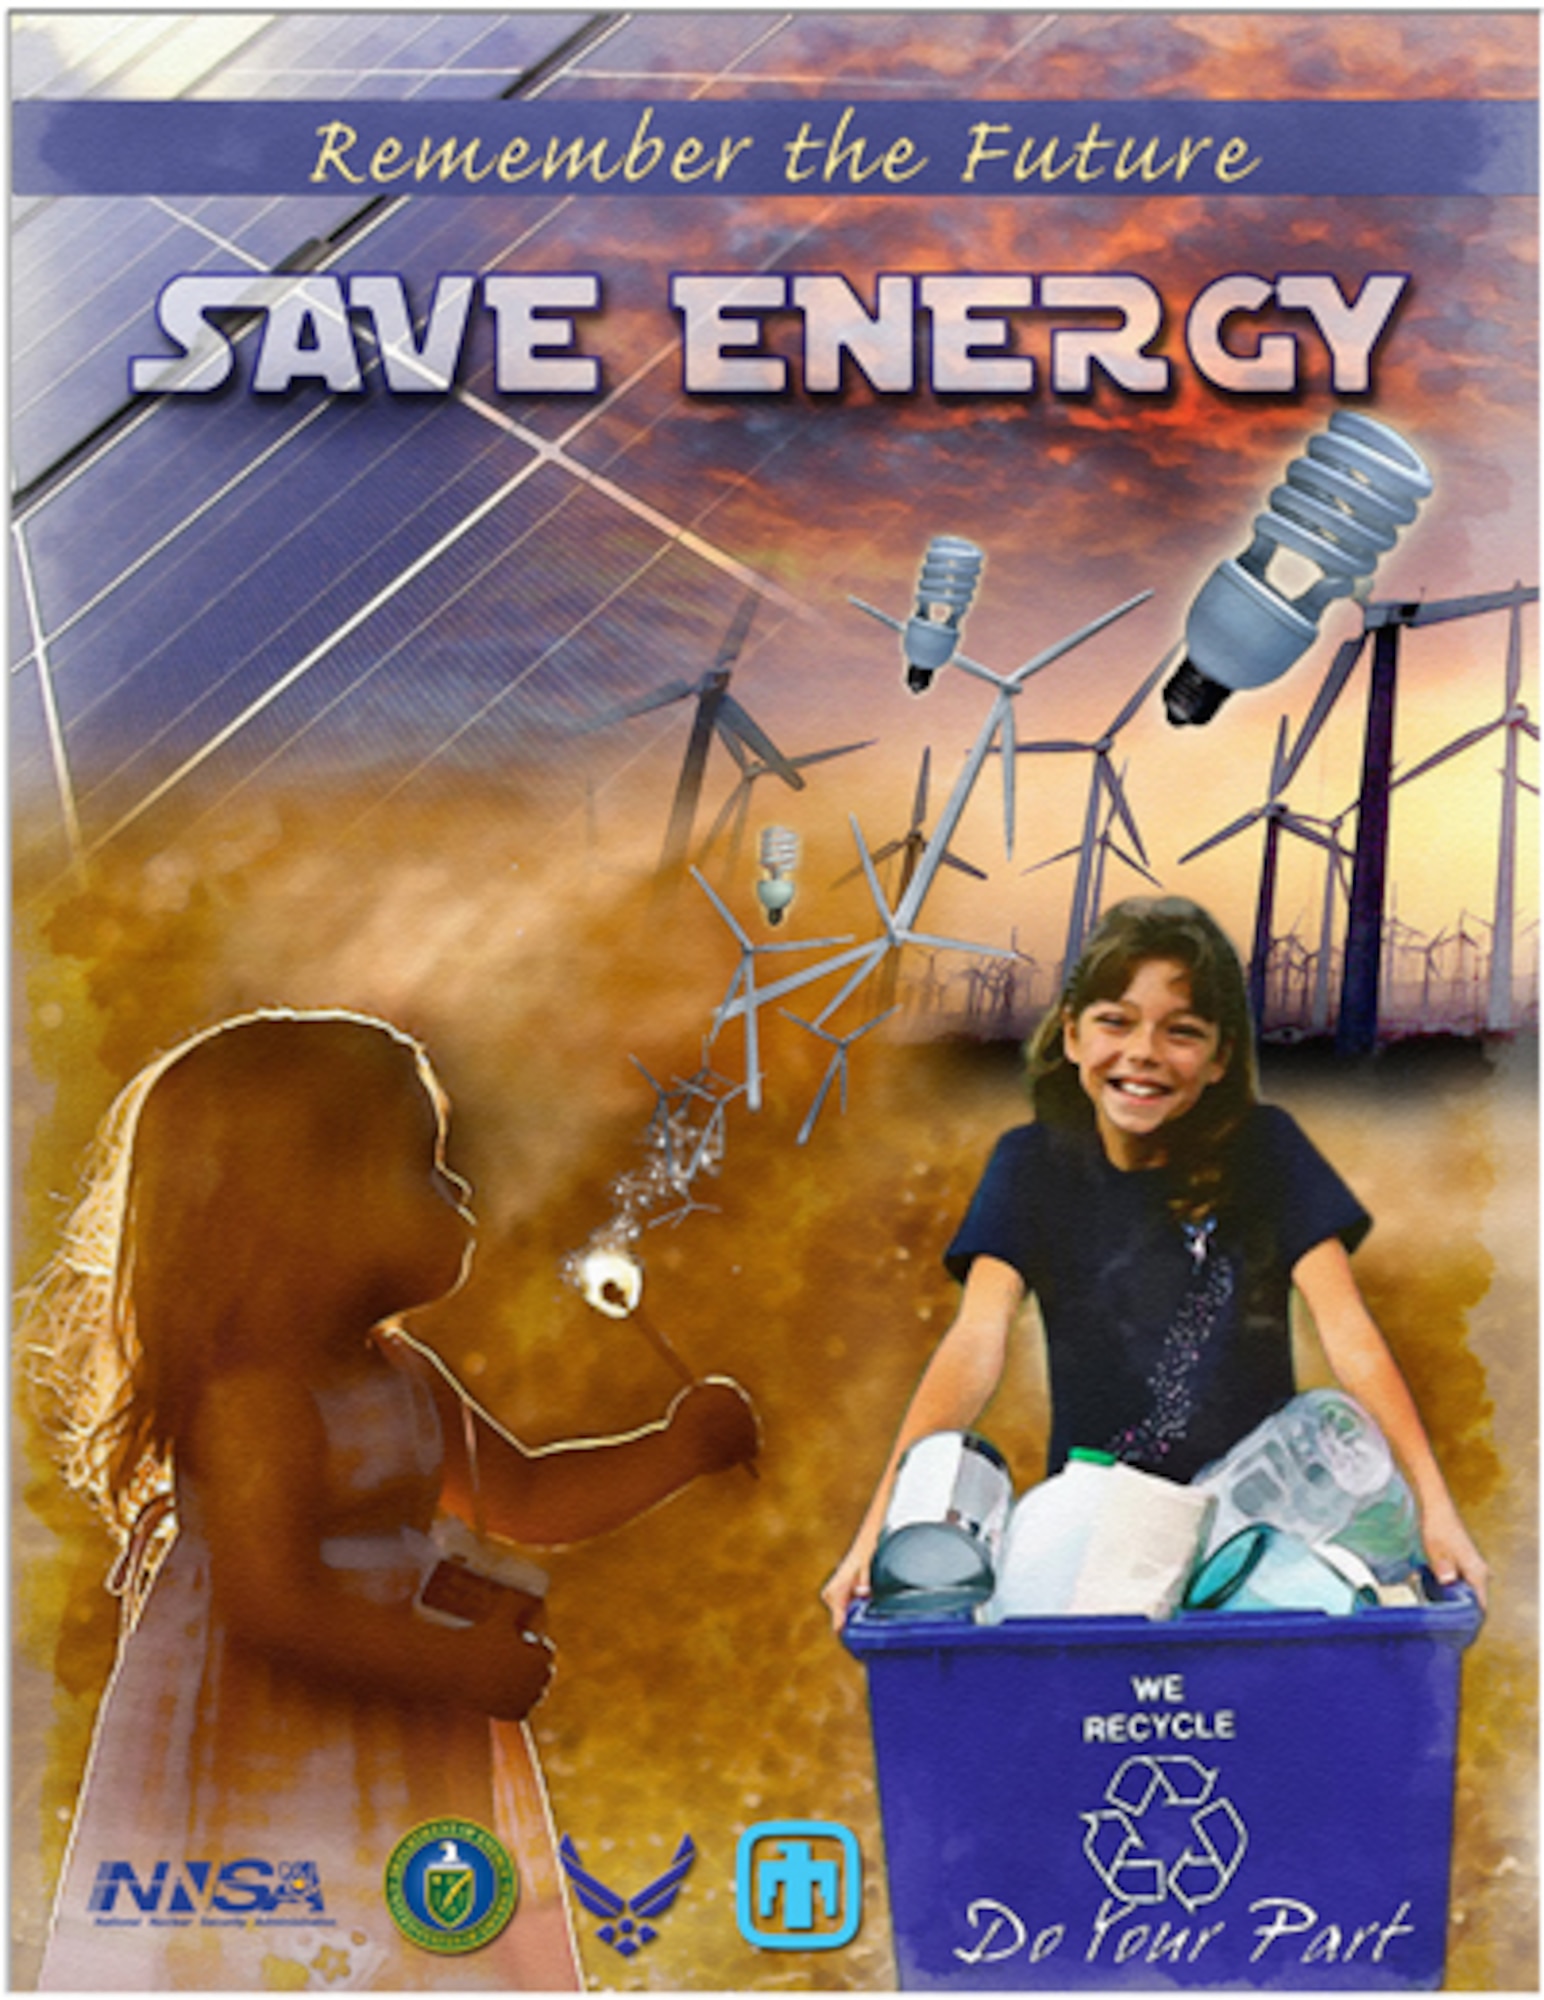 Energy conservation poster